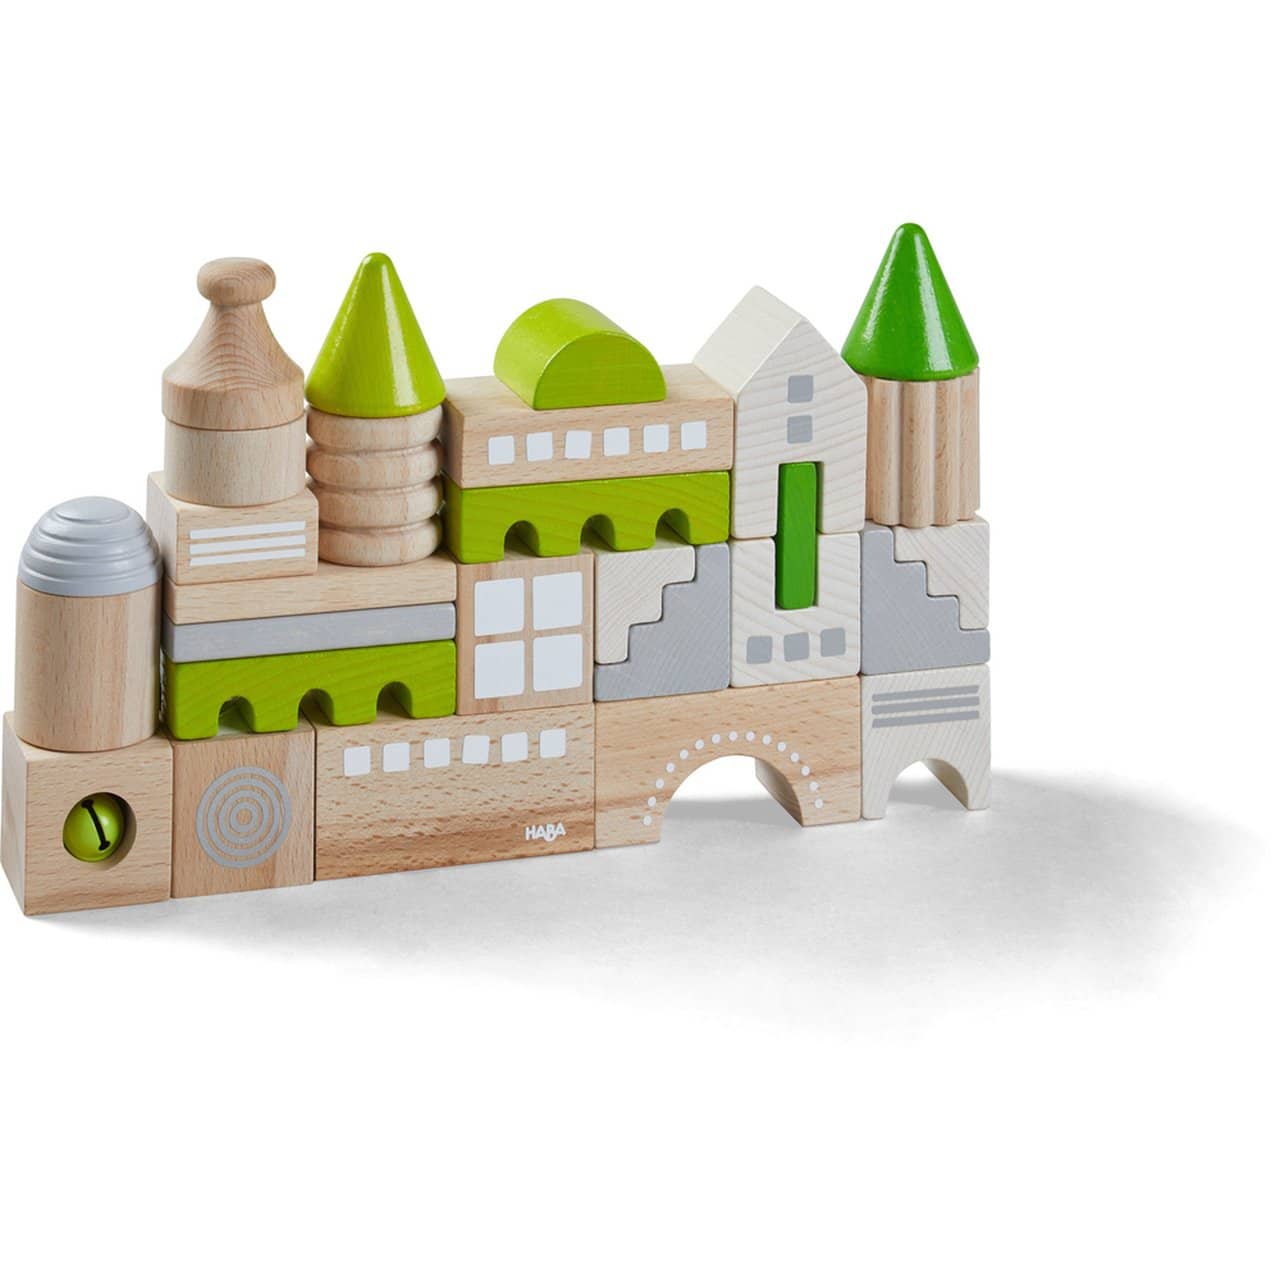 Haba Building Block System Clever-Up! 4.0